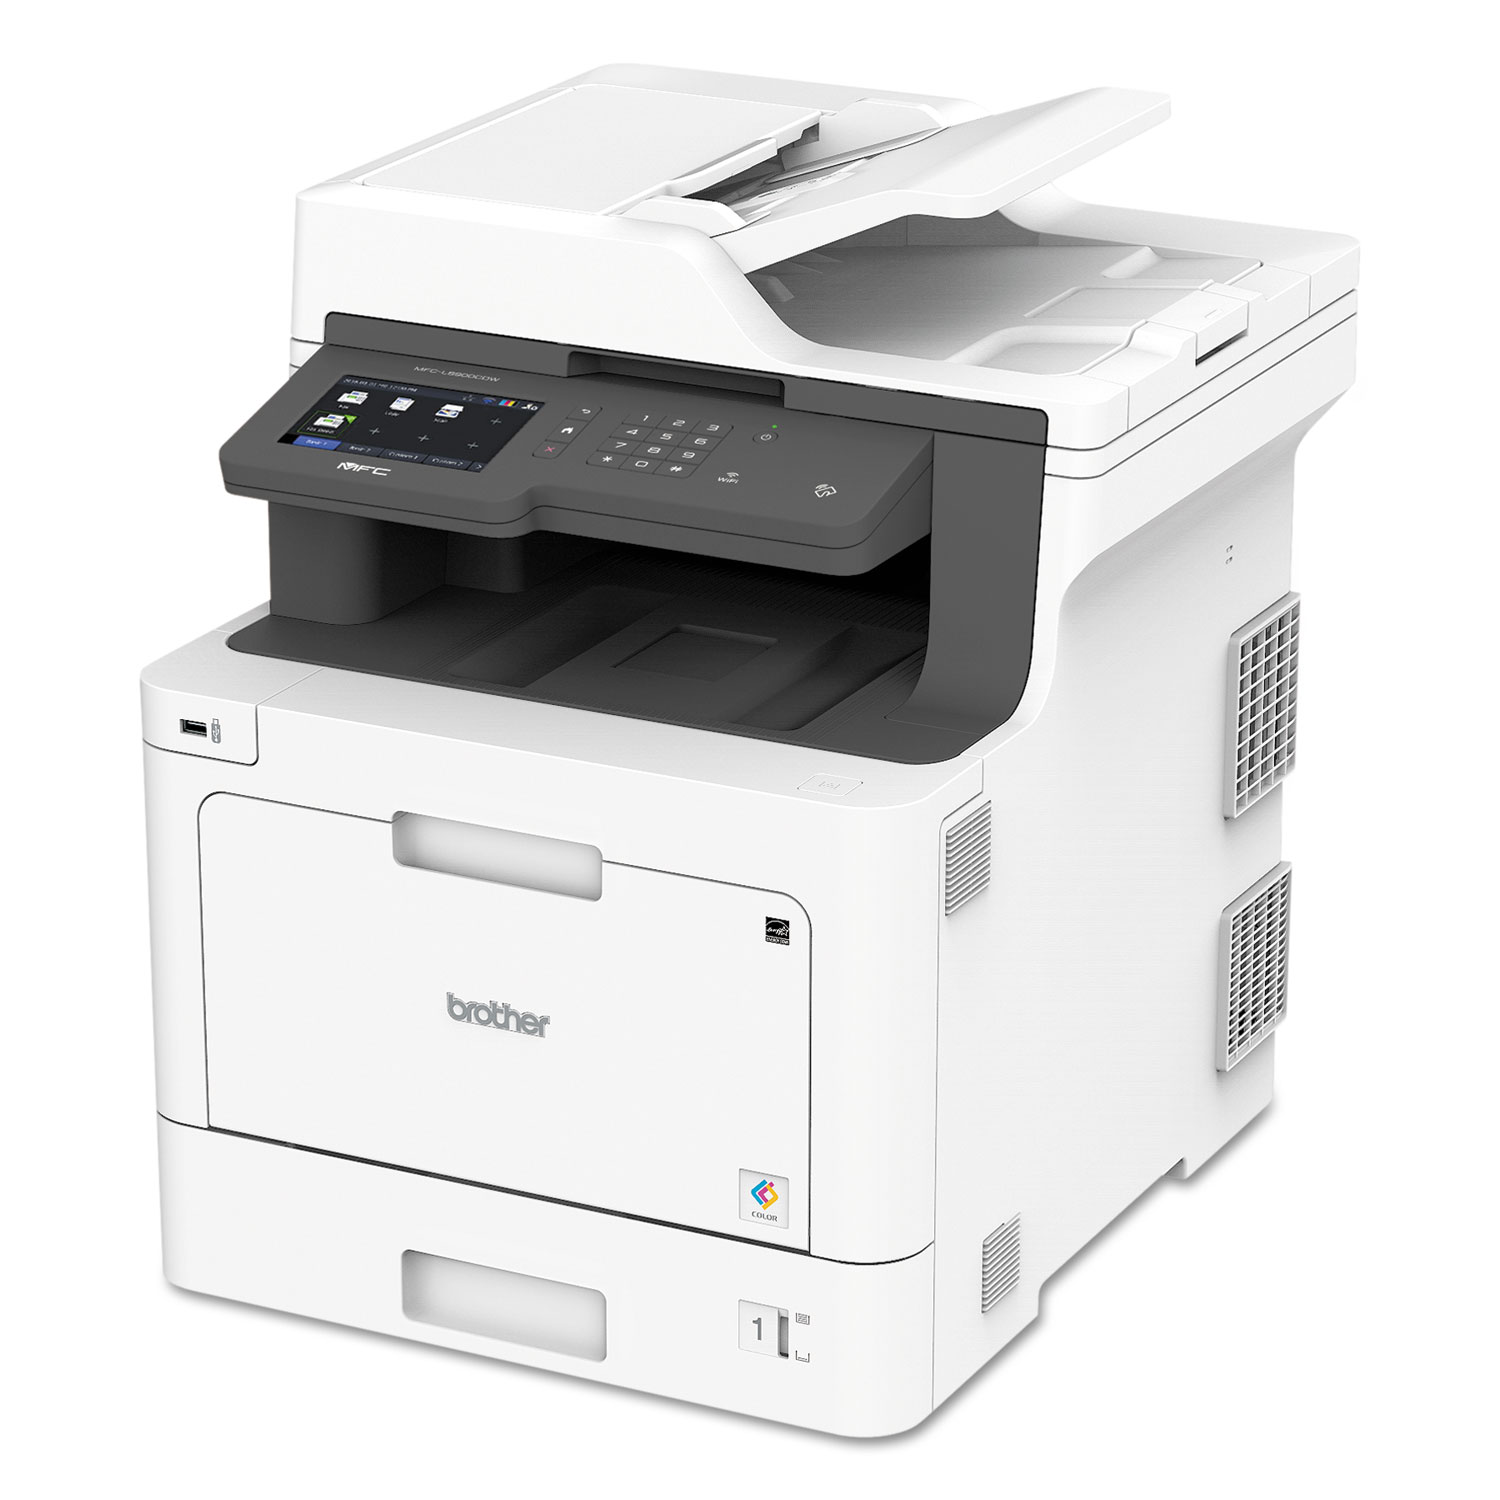 MFC-L8900CDW Business Color Laser All-in-One, Copy/Fax/Print/Scan